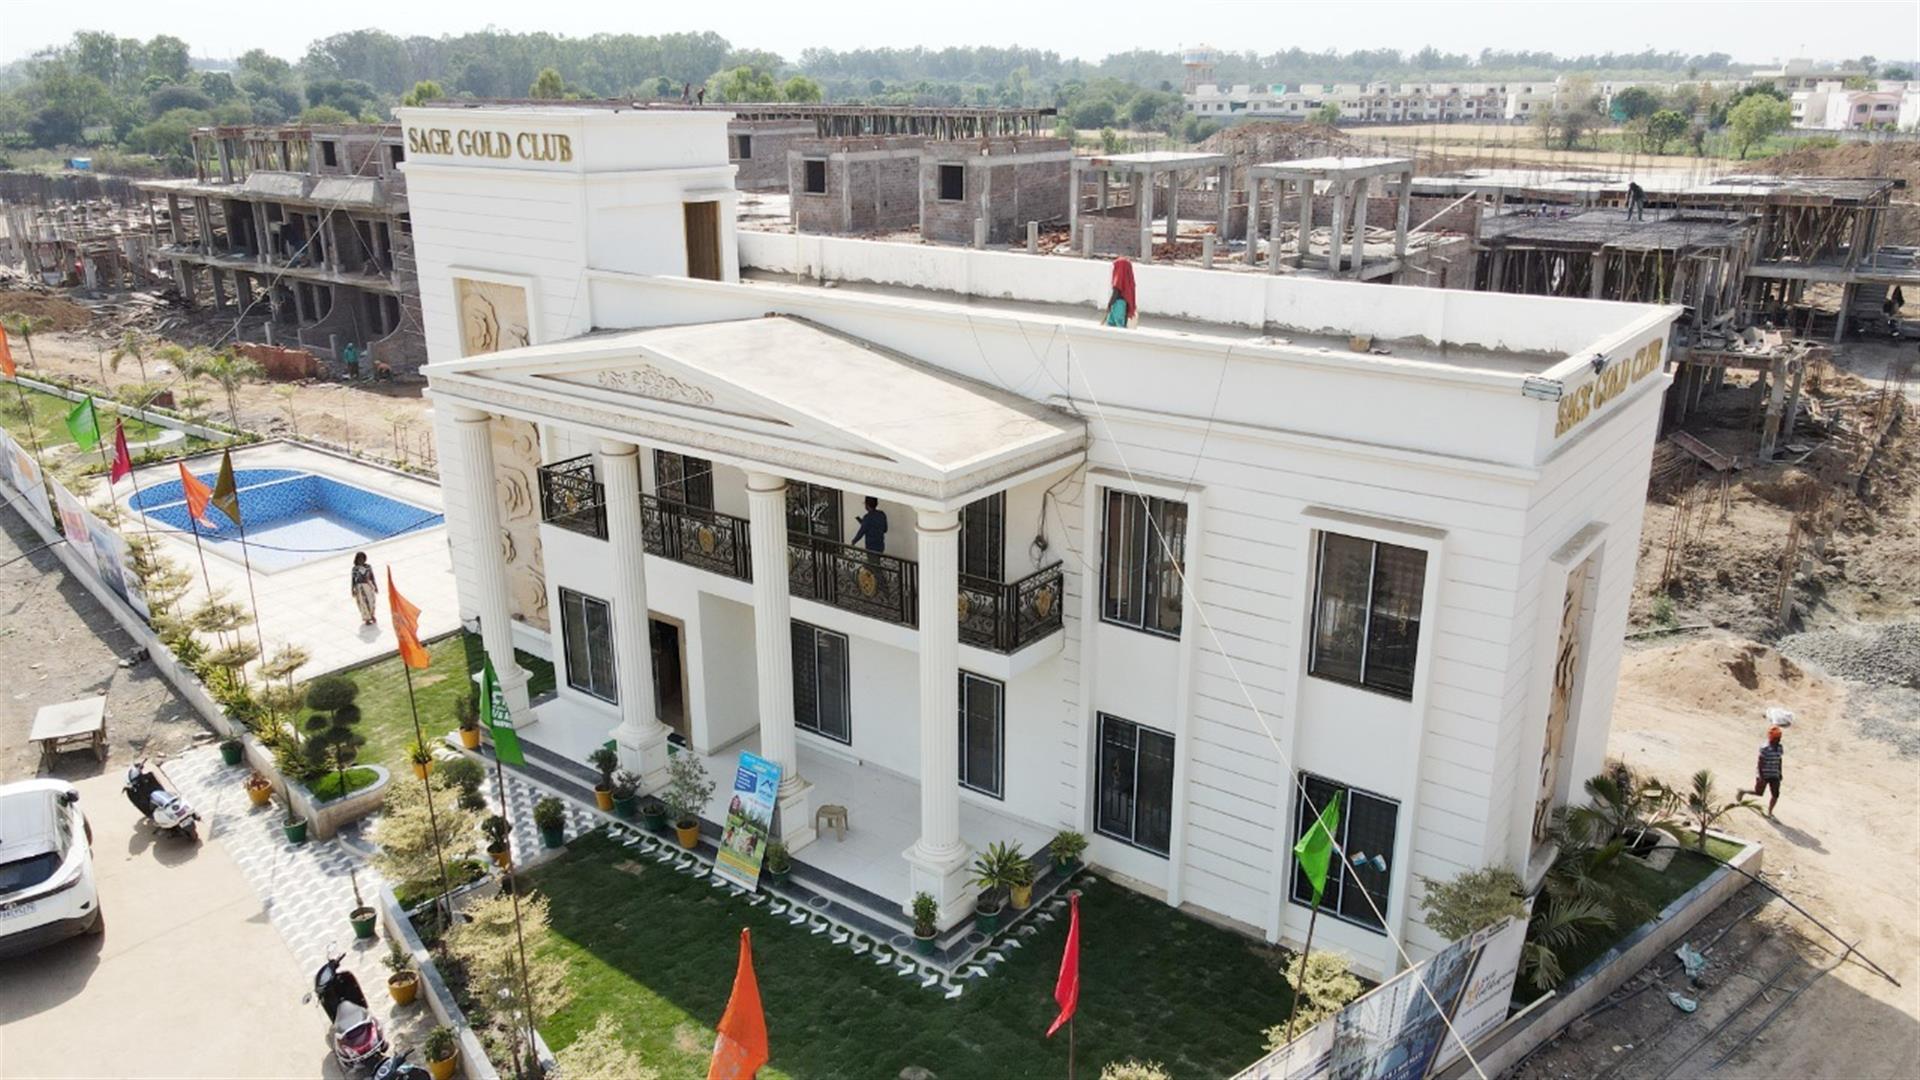 sage-golden-spring-ayodhya-bypass-bhopal-3-bhk-villa-house